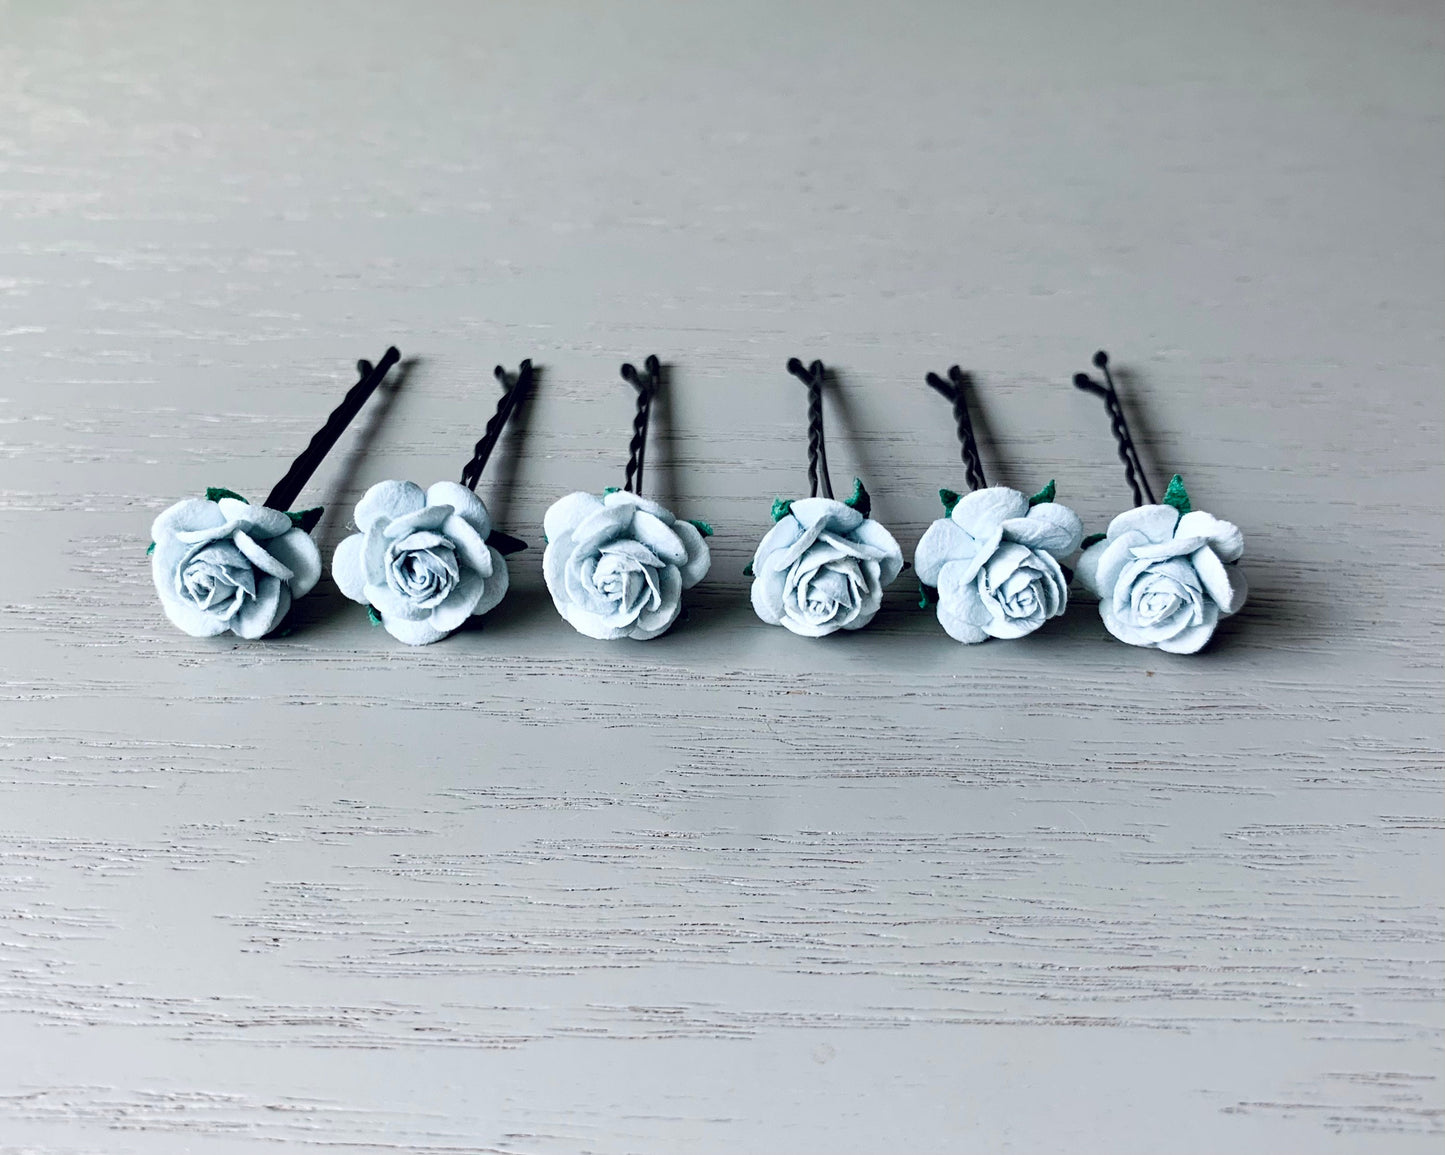 Grey Rose Hair Pins, Set of 6 Paper Flower Bobby Pins in Soft Light Gray, Rustic Bridal Hair Accessories for Floral Country Wedding MPR6